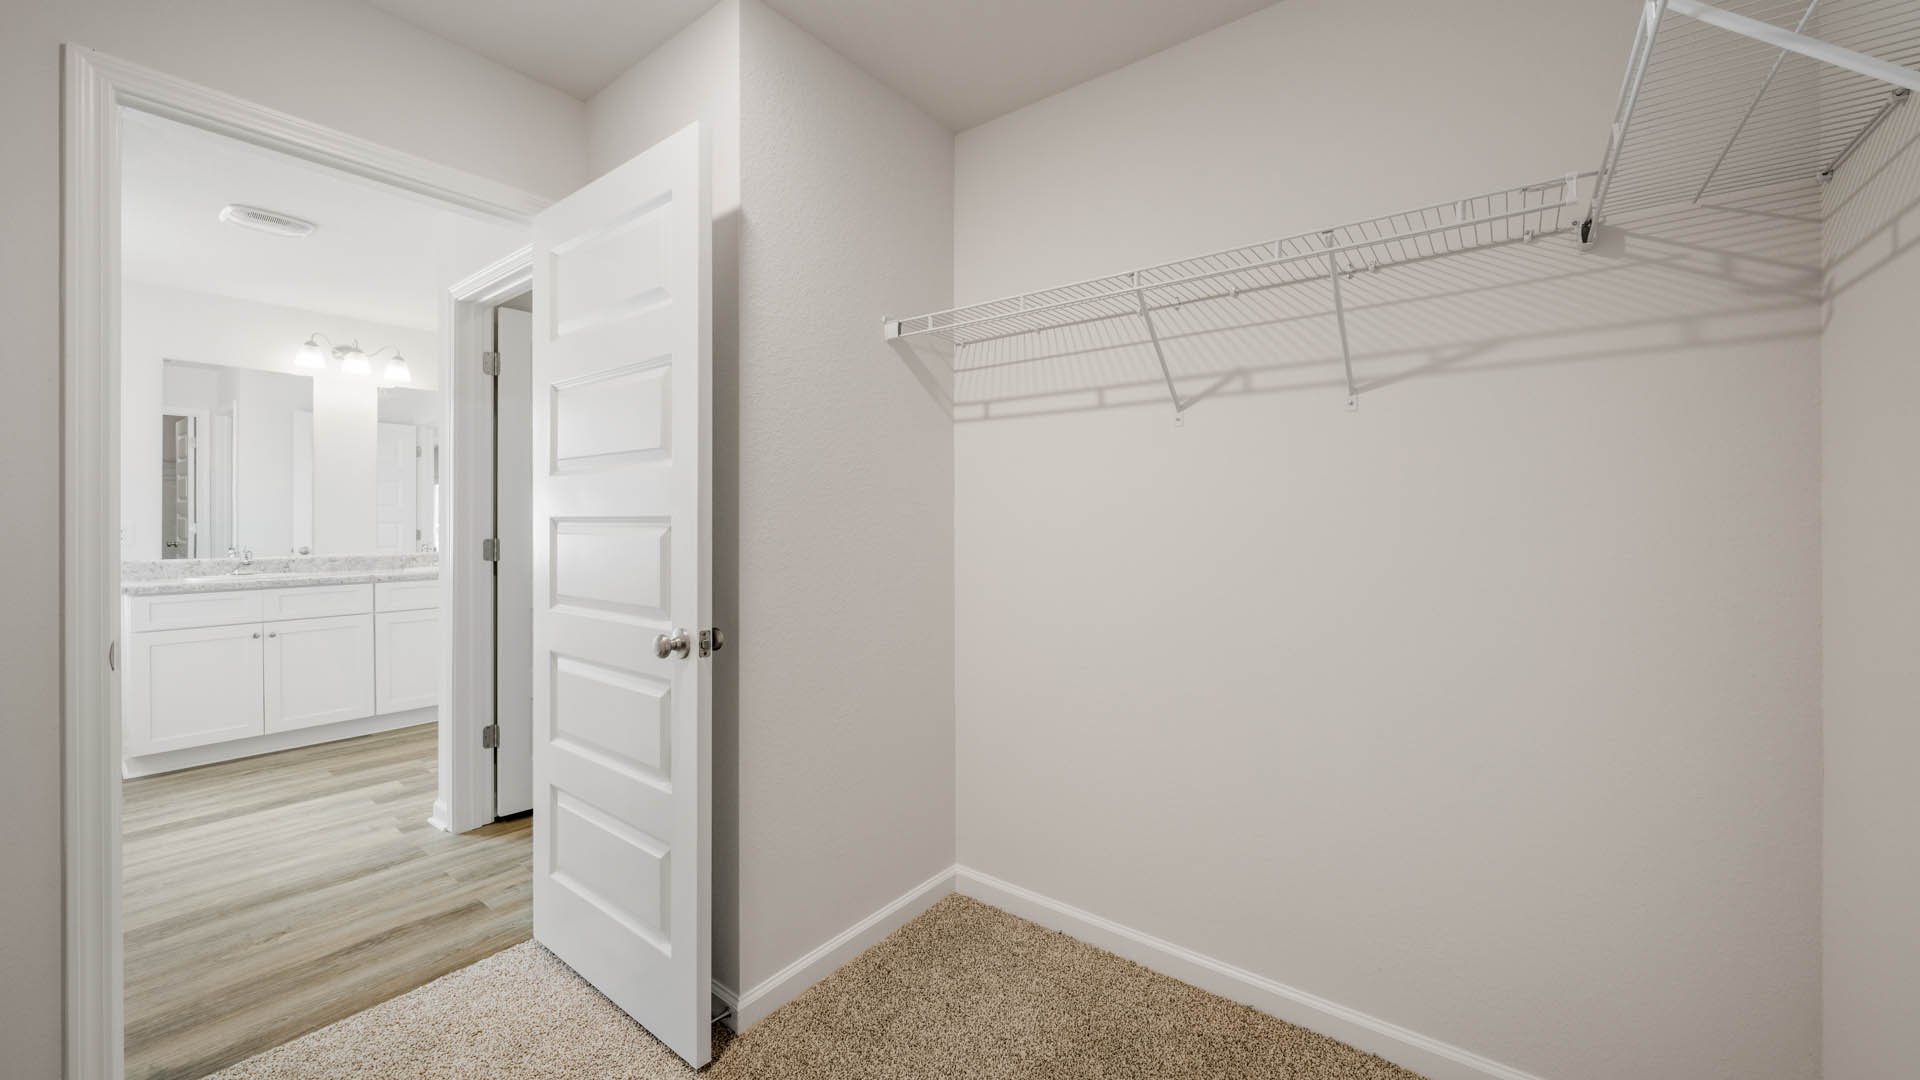 Walk-in closet with ventilated shelving and bathroom entrance.